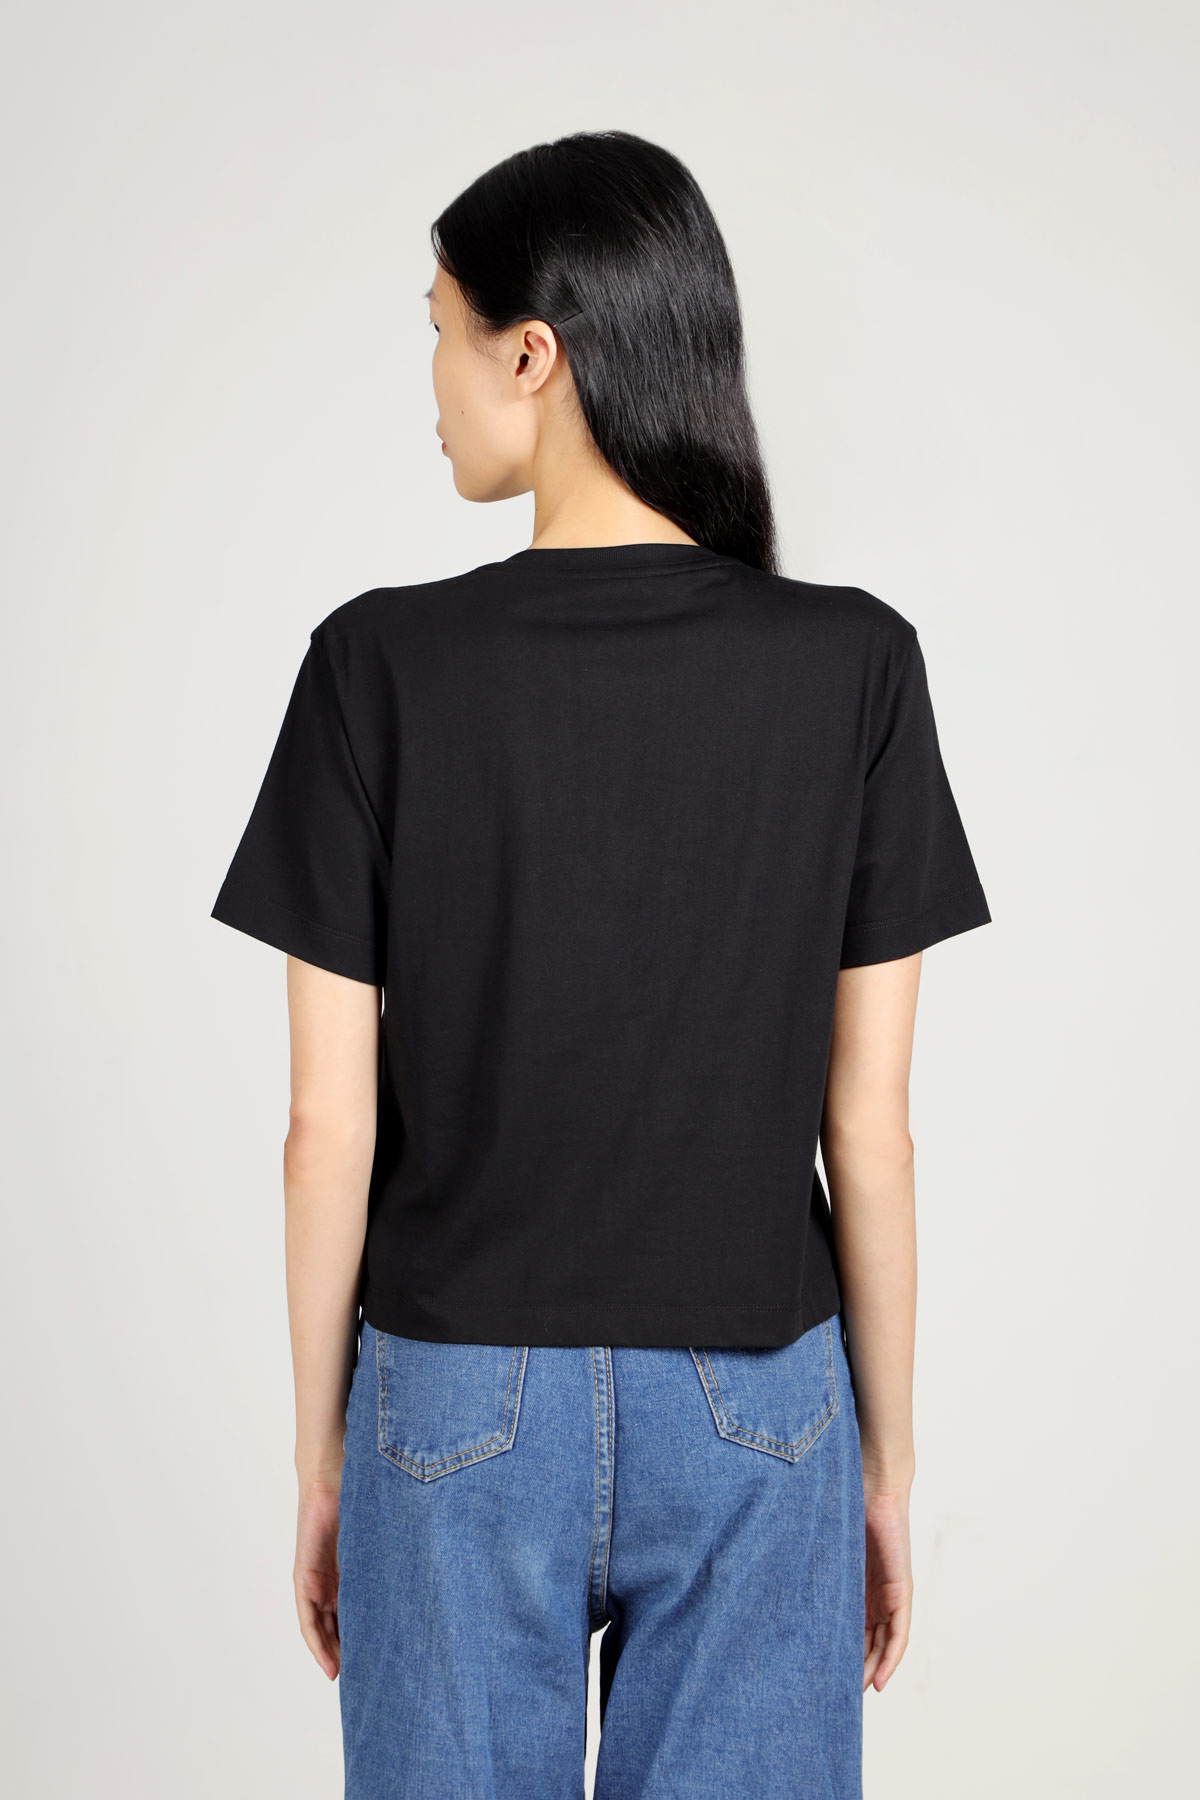 FENDI Women A Jour Embroidered Logo Cropped T-Shirt in Black 2